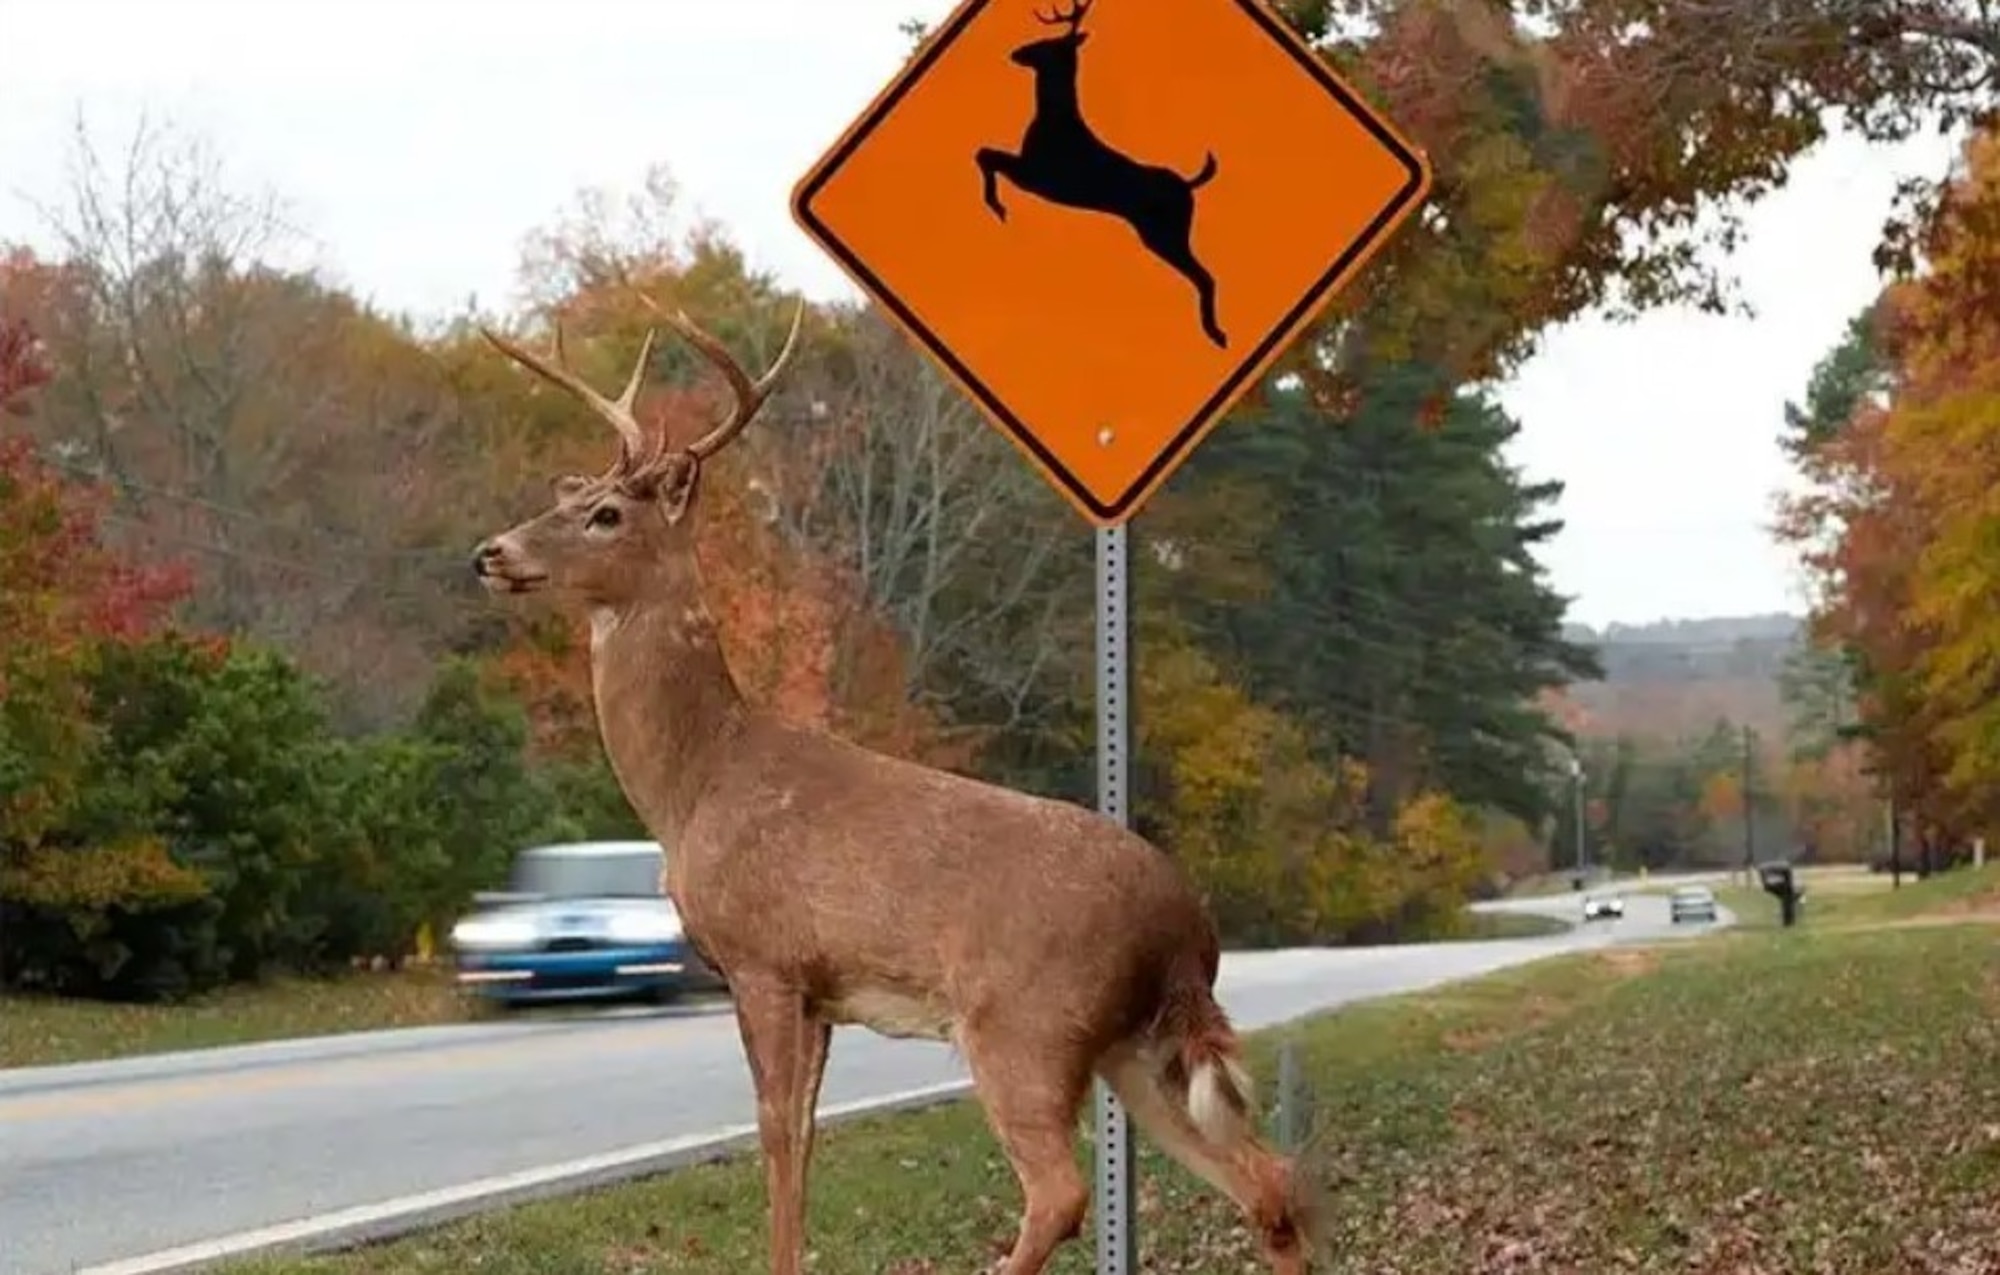 Nearly 1.5 million deer-related accidents happen every year, according to the National Highway Traffic Safety Administration. Never swerve your vehicle when a deer crosses in front of you. This is the leading cause of injuries and deaths for deer-related accidents, NHTSA officials said.